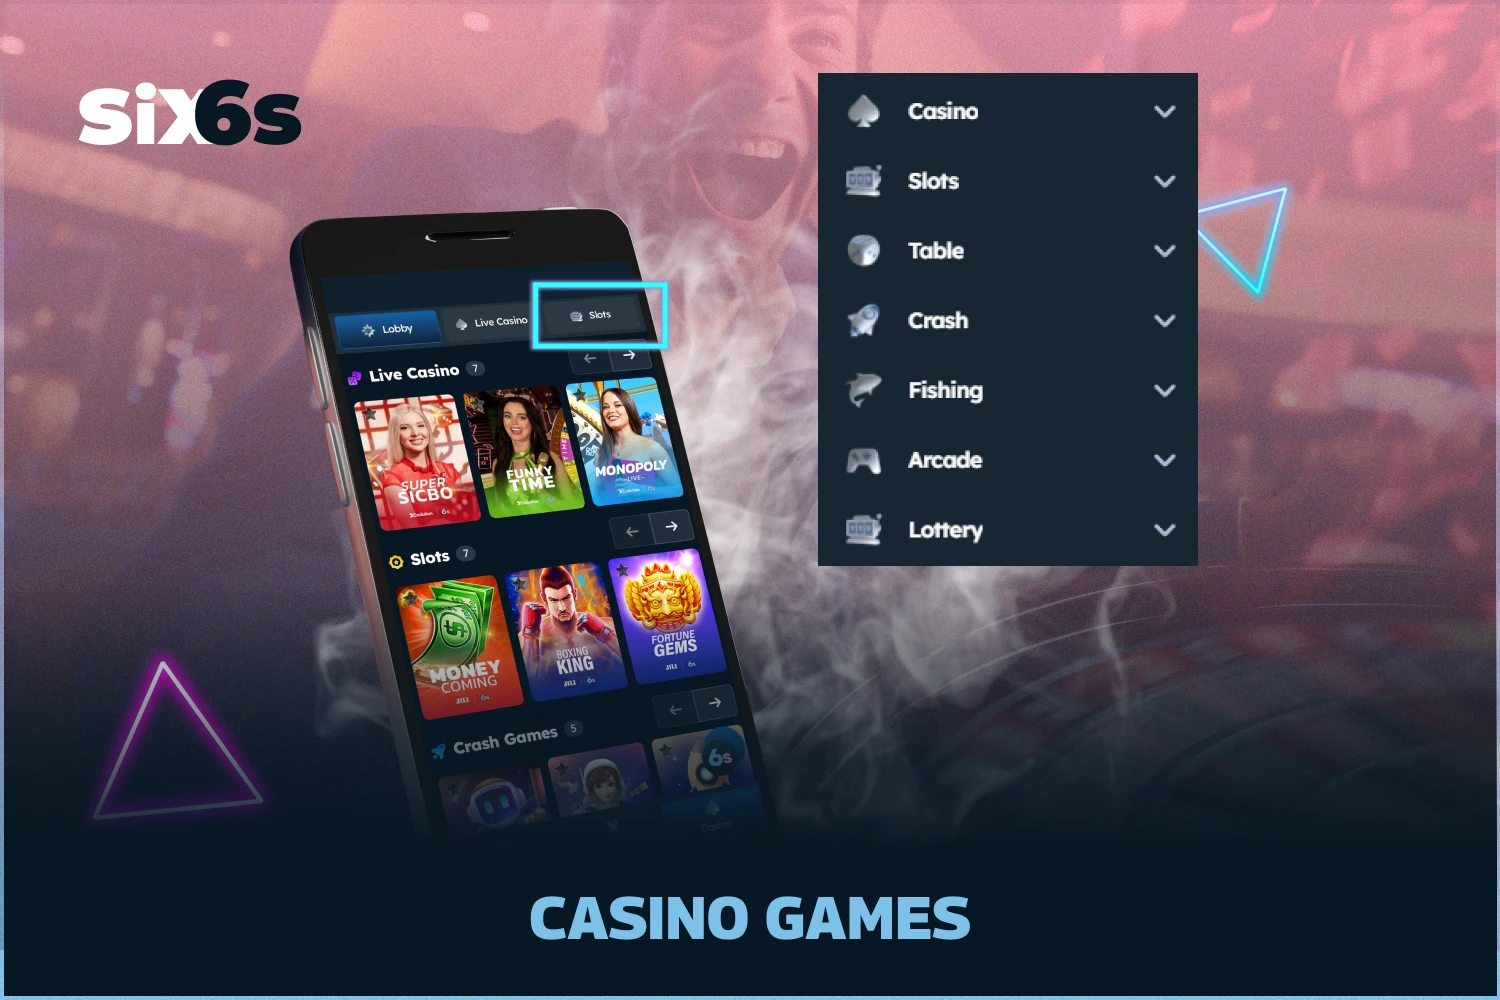 With the Six6s app, players from Bangladesh get access to all the features of the casino section where all games are optimized and run without lags